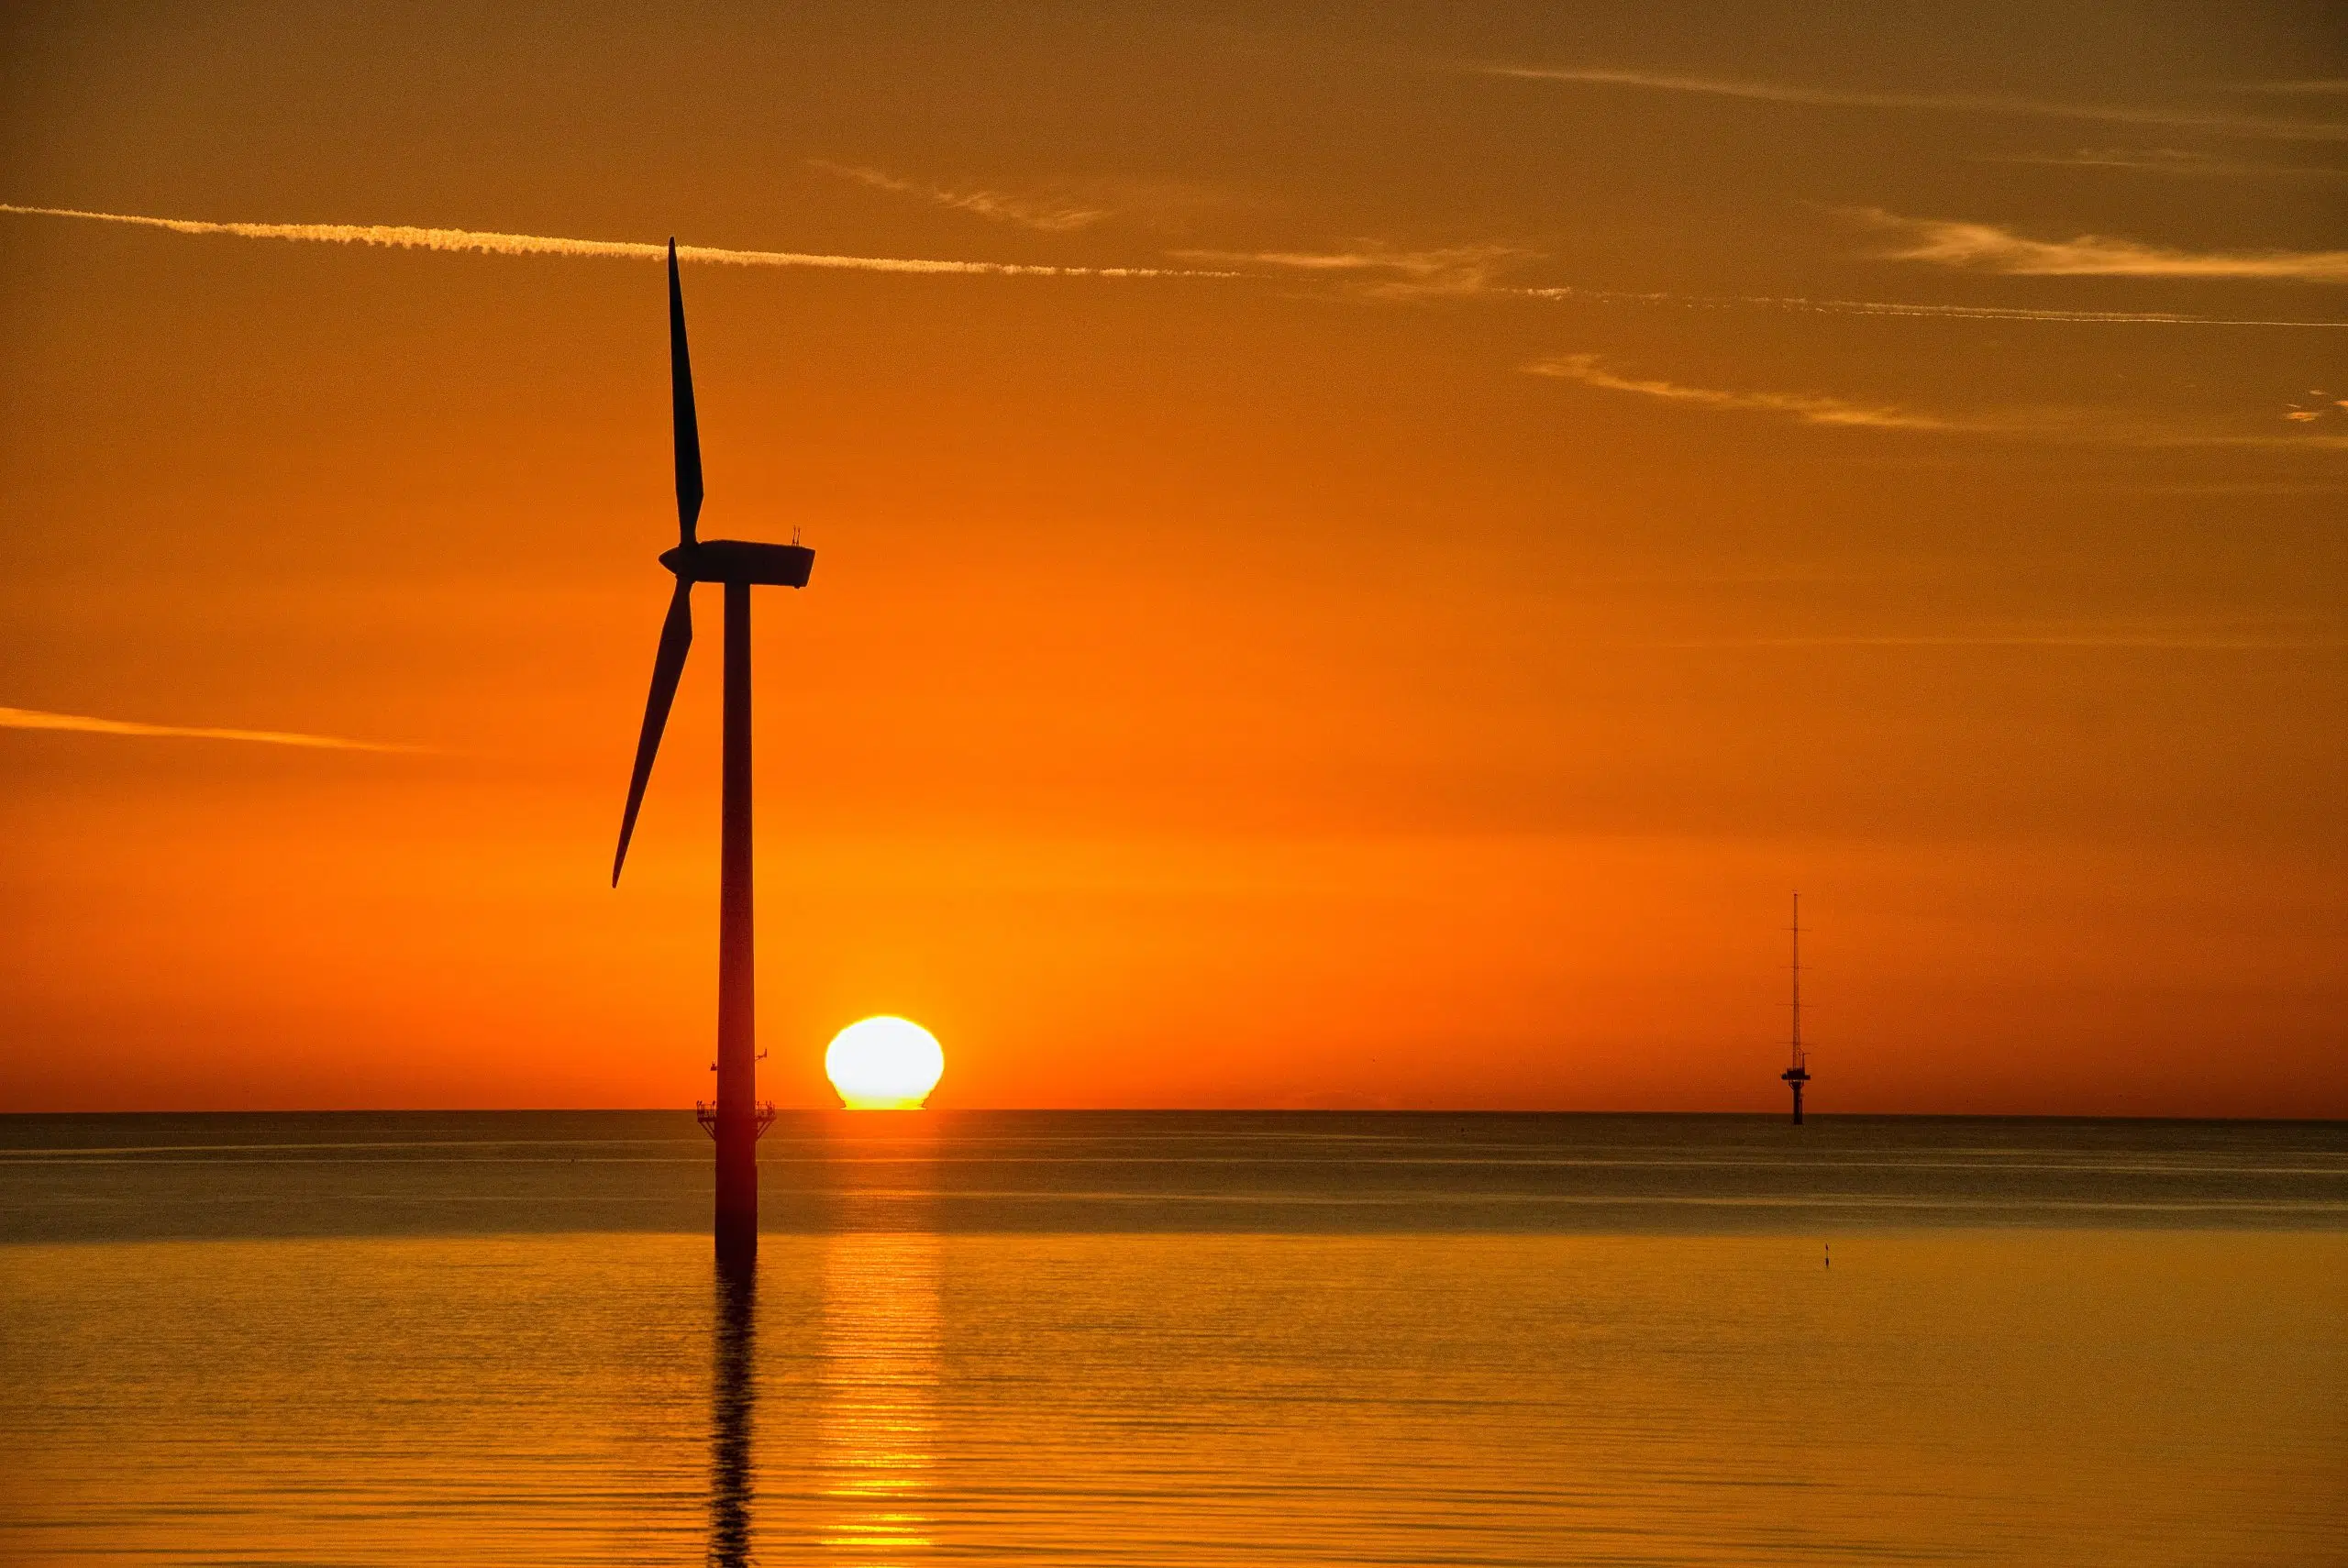 Louisiana expected to reap benefits from Wind Energy Area designation in the Gulf.